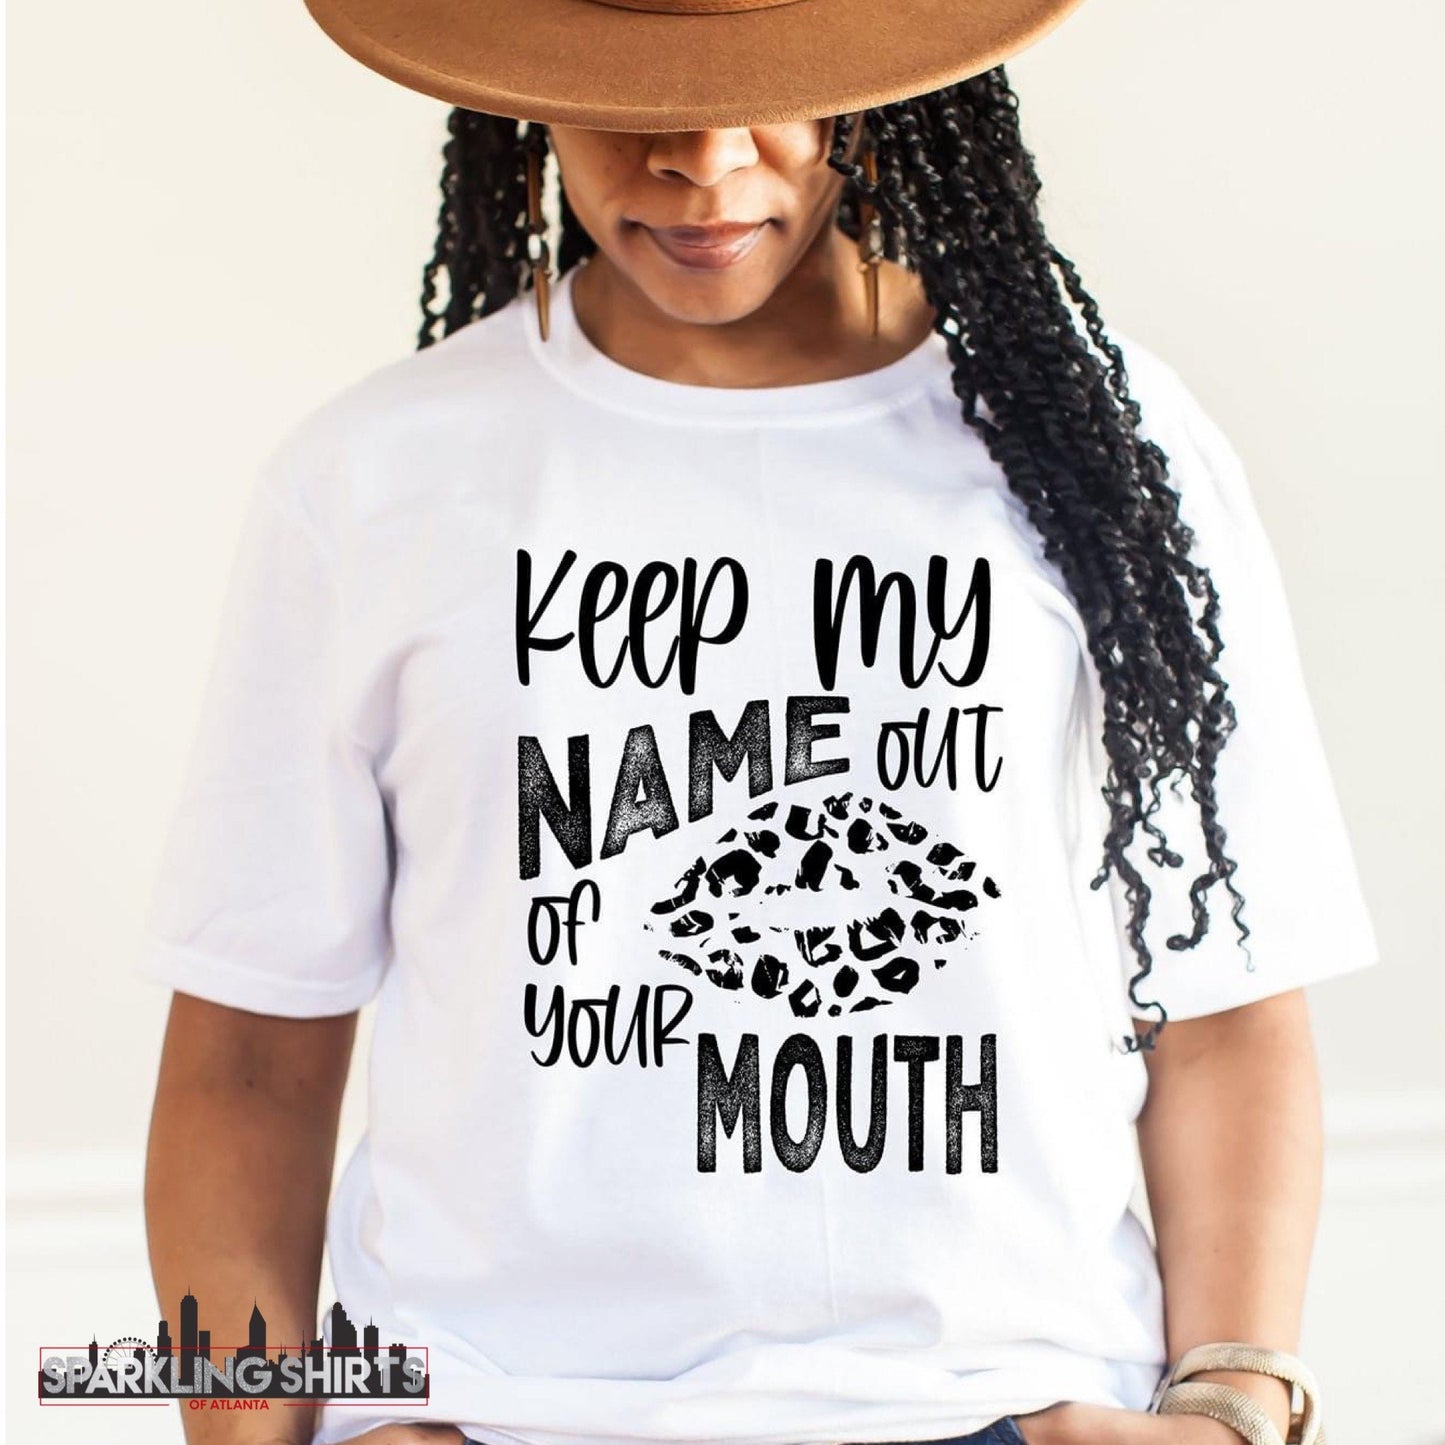 Keep My Name Out of Your Mouth| Sarcasm | Sassy| I Said What I Said| Inspiration| Fun T-shirts| Graphic T-shirt|